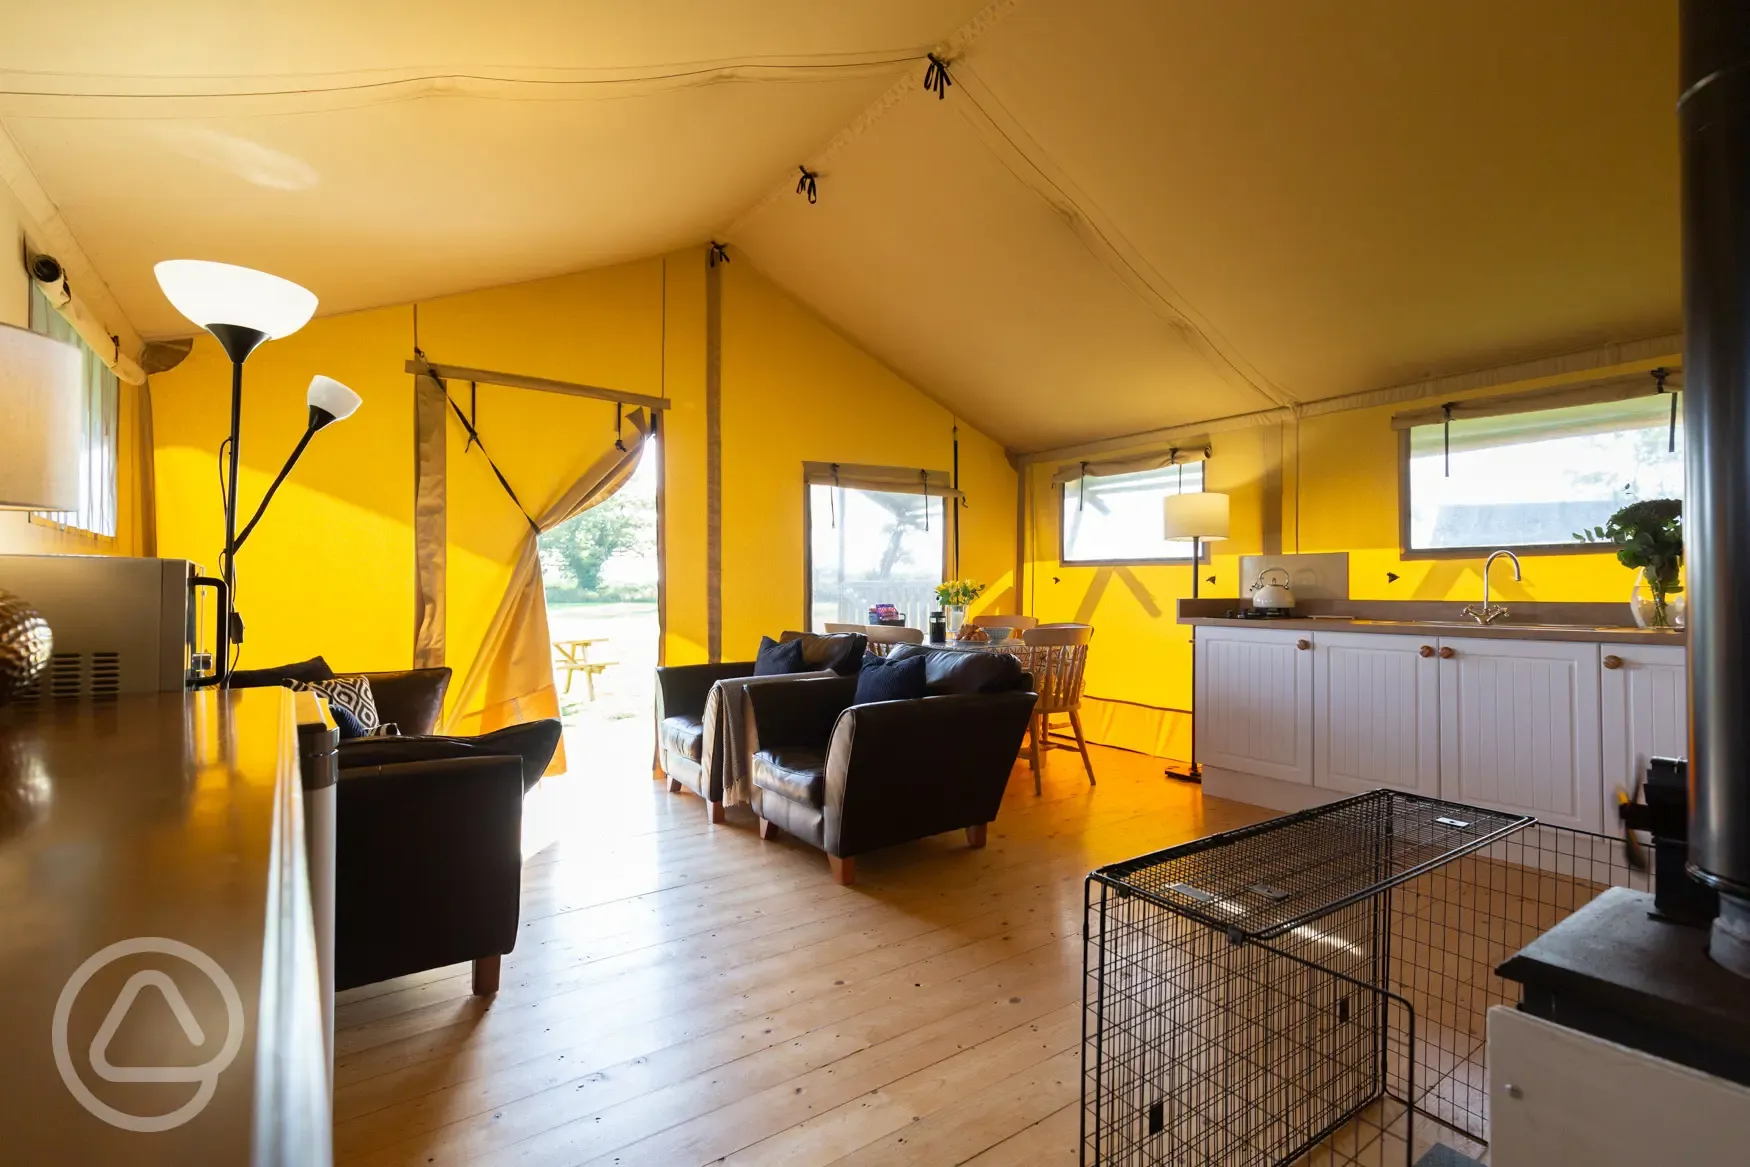 Glamping life made easier with electricity, fridge, microwave. Comfy living area